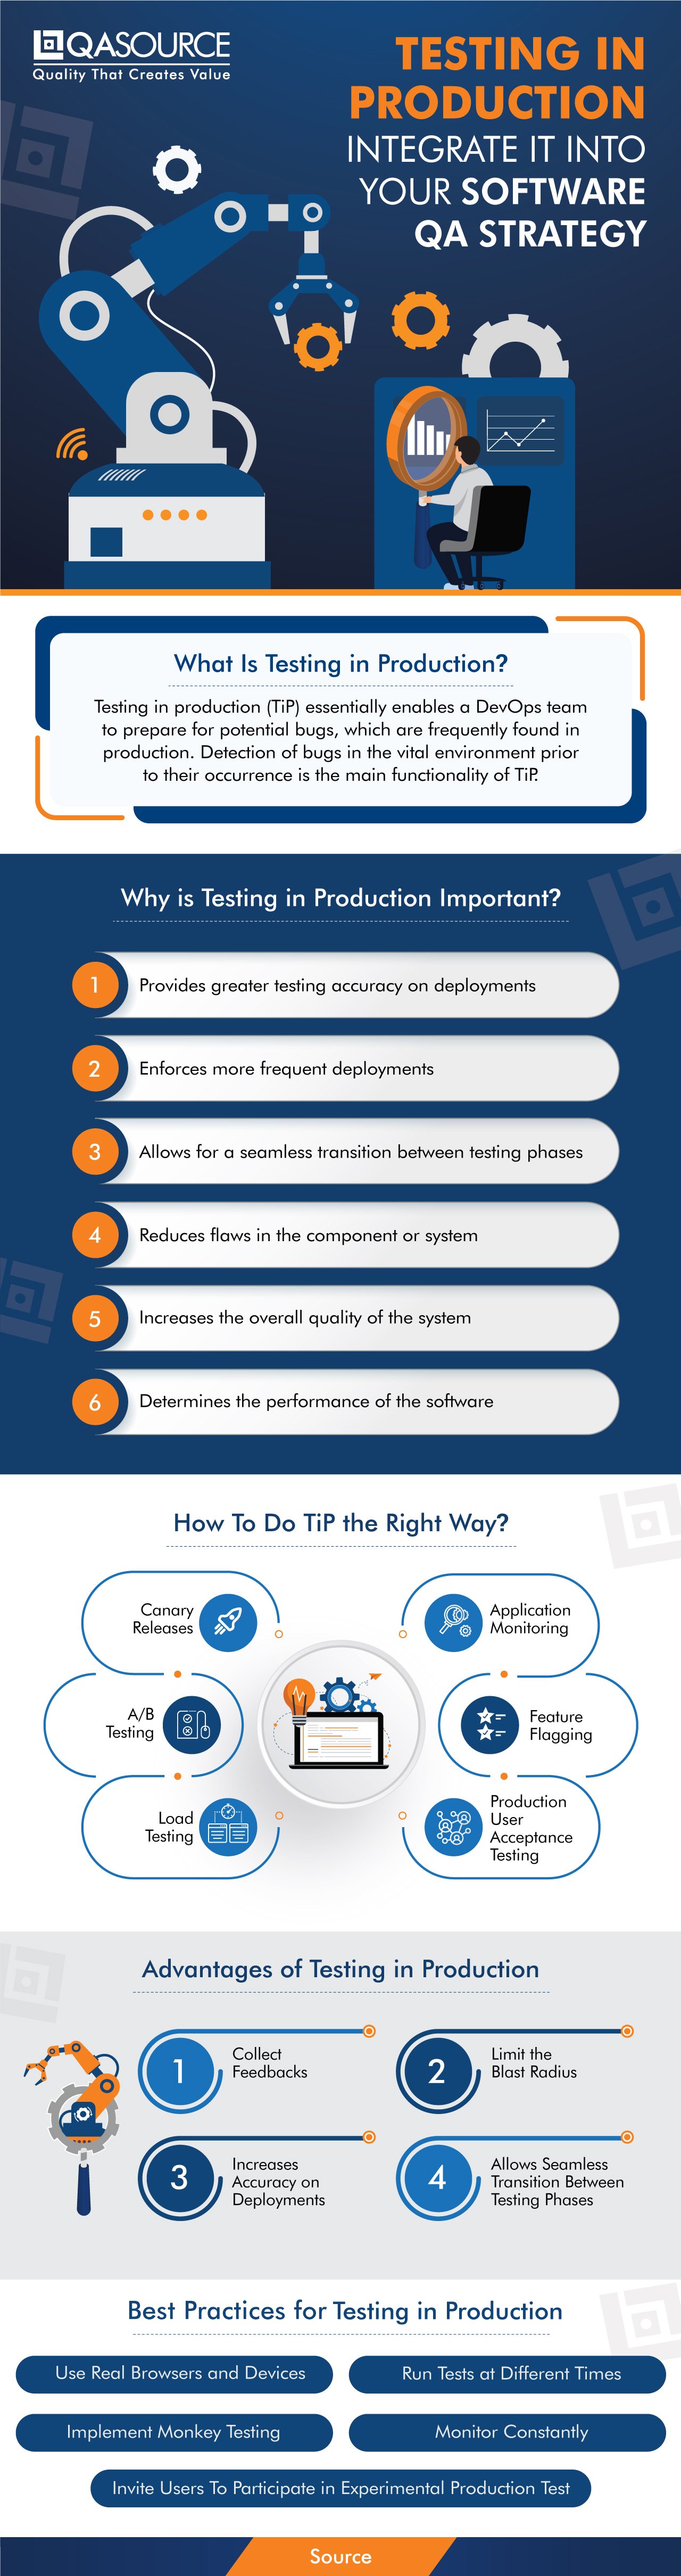 Testing in Production: Integrate It Into Your Software QA Strategy (Infographic)